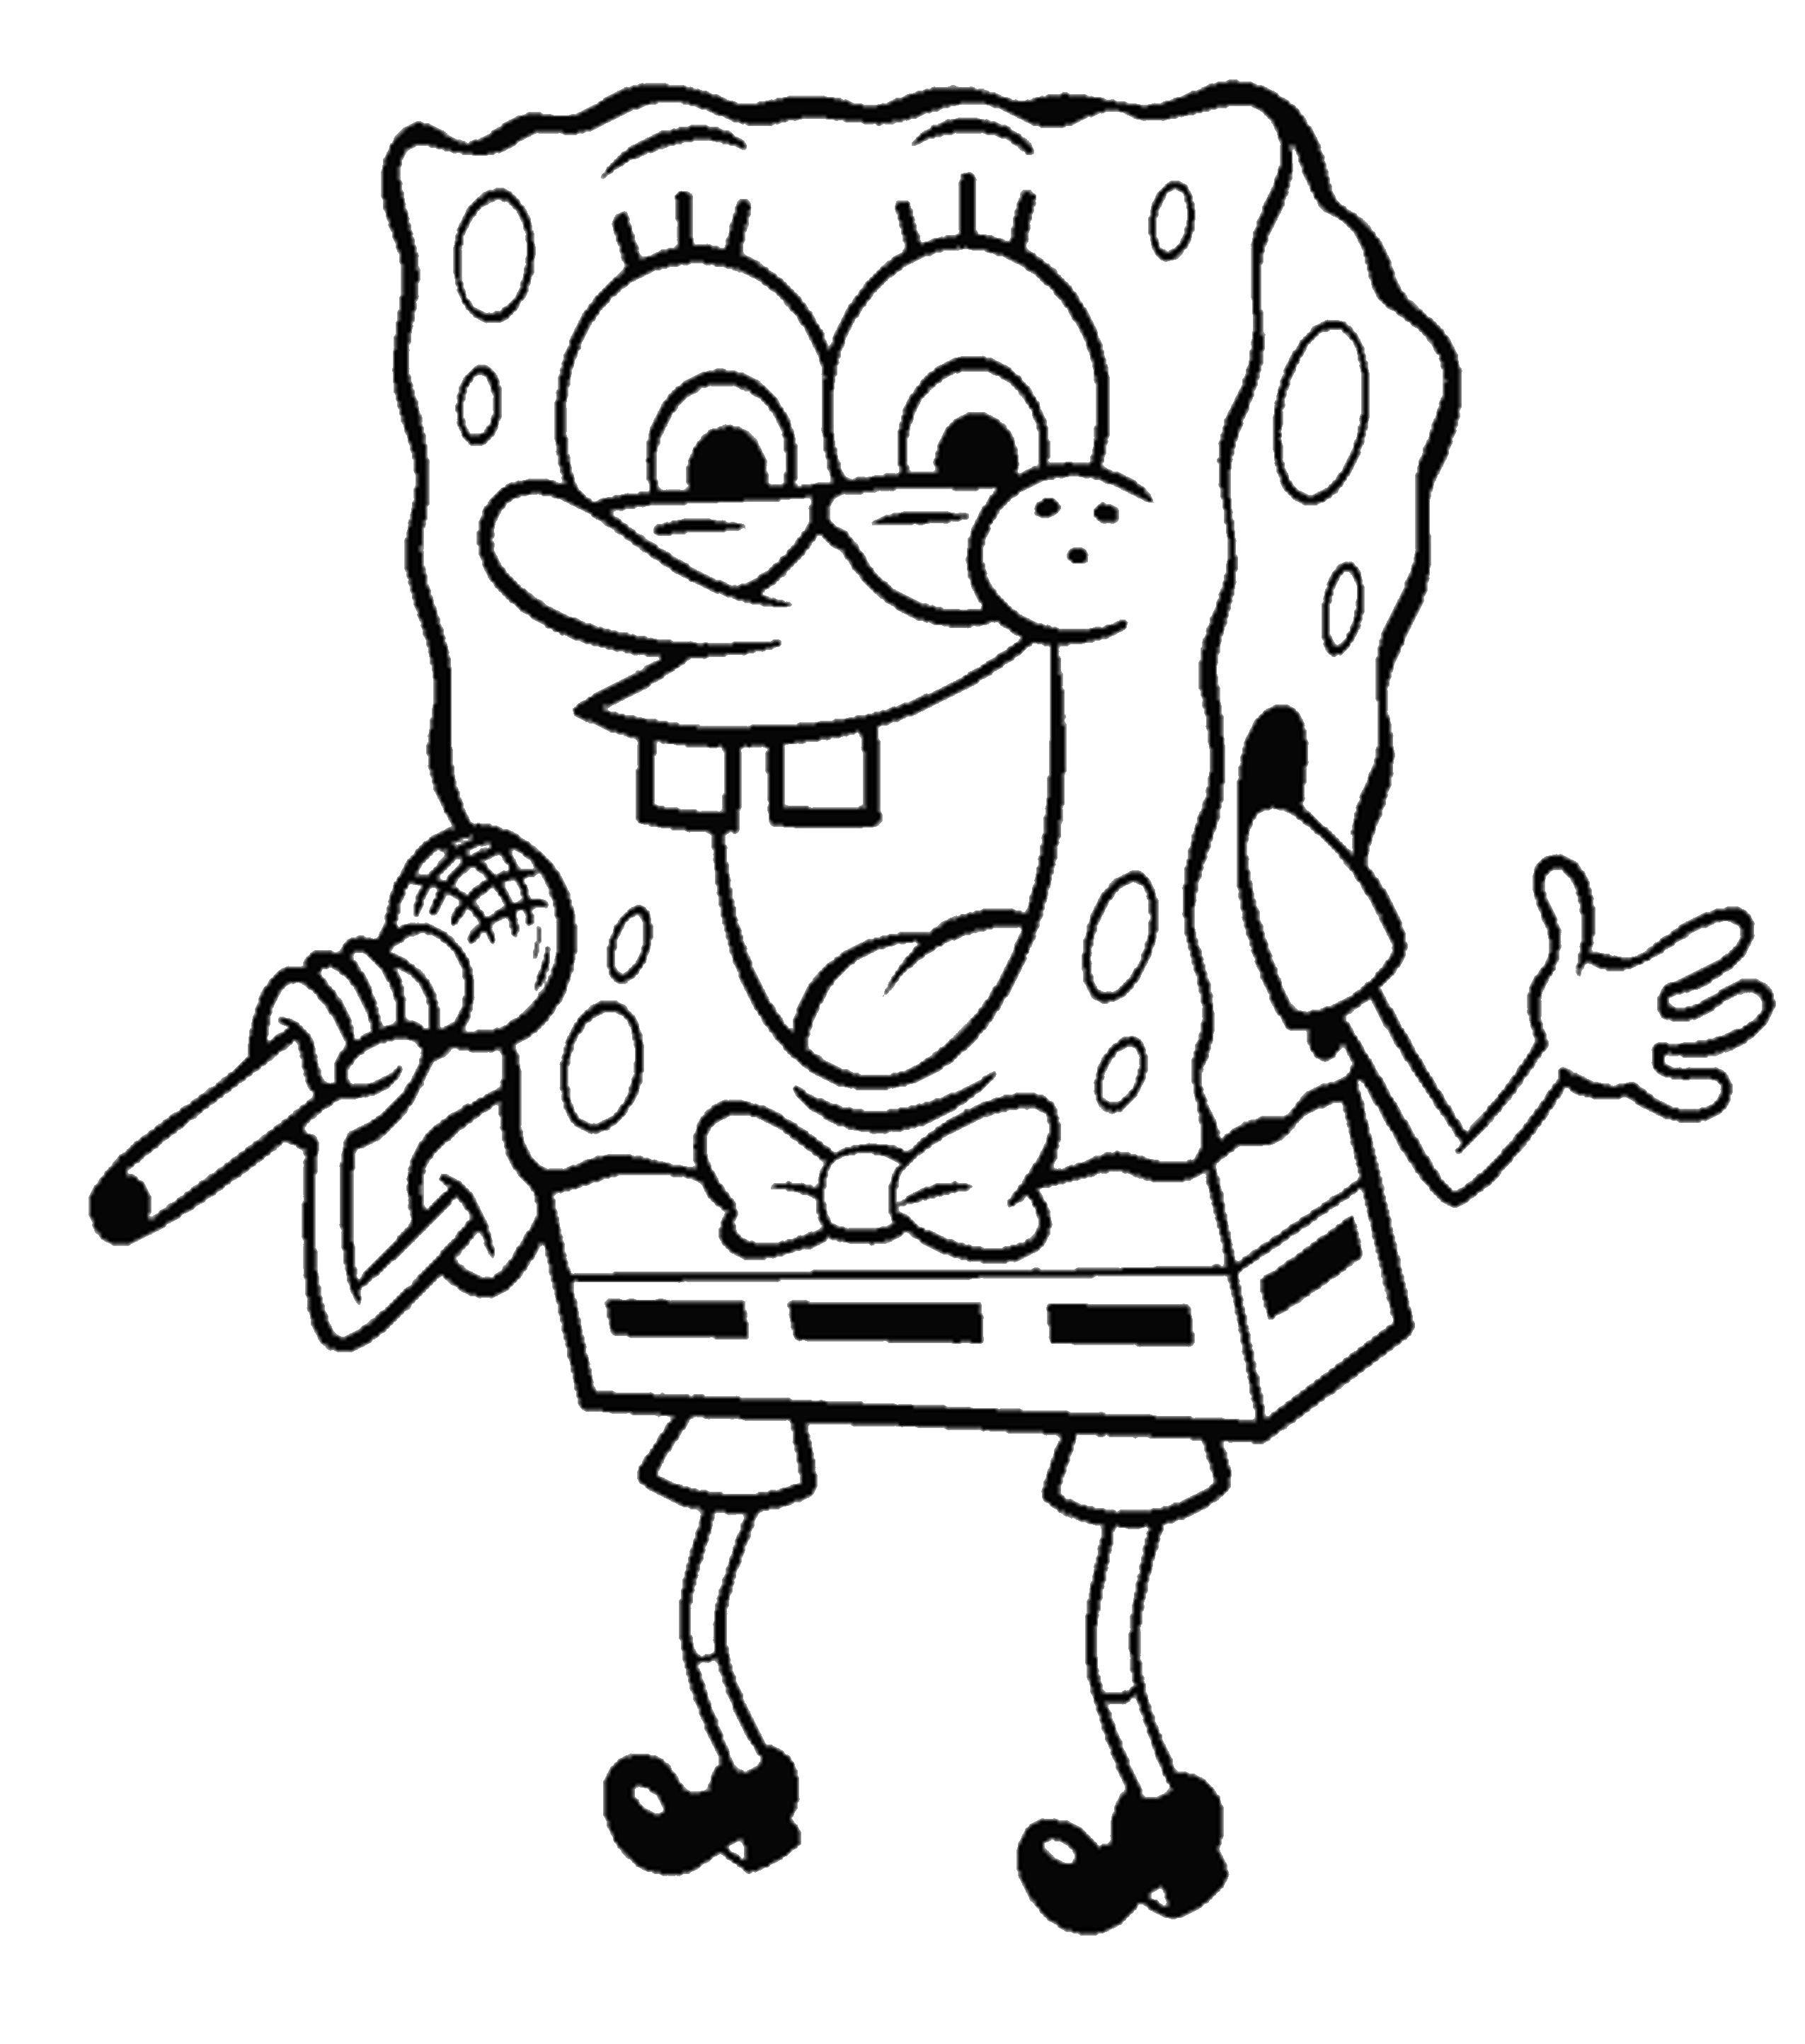 Coloring Spongebob with microphone. Category Spongebob. Tags:  Cartoon character, spongebob, spongebob.